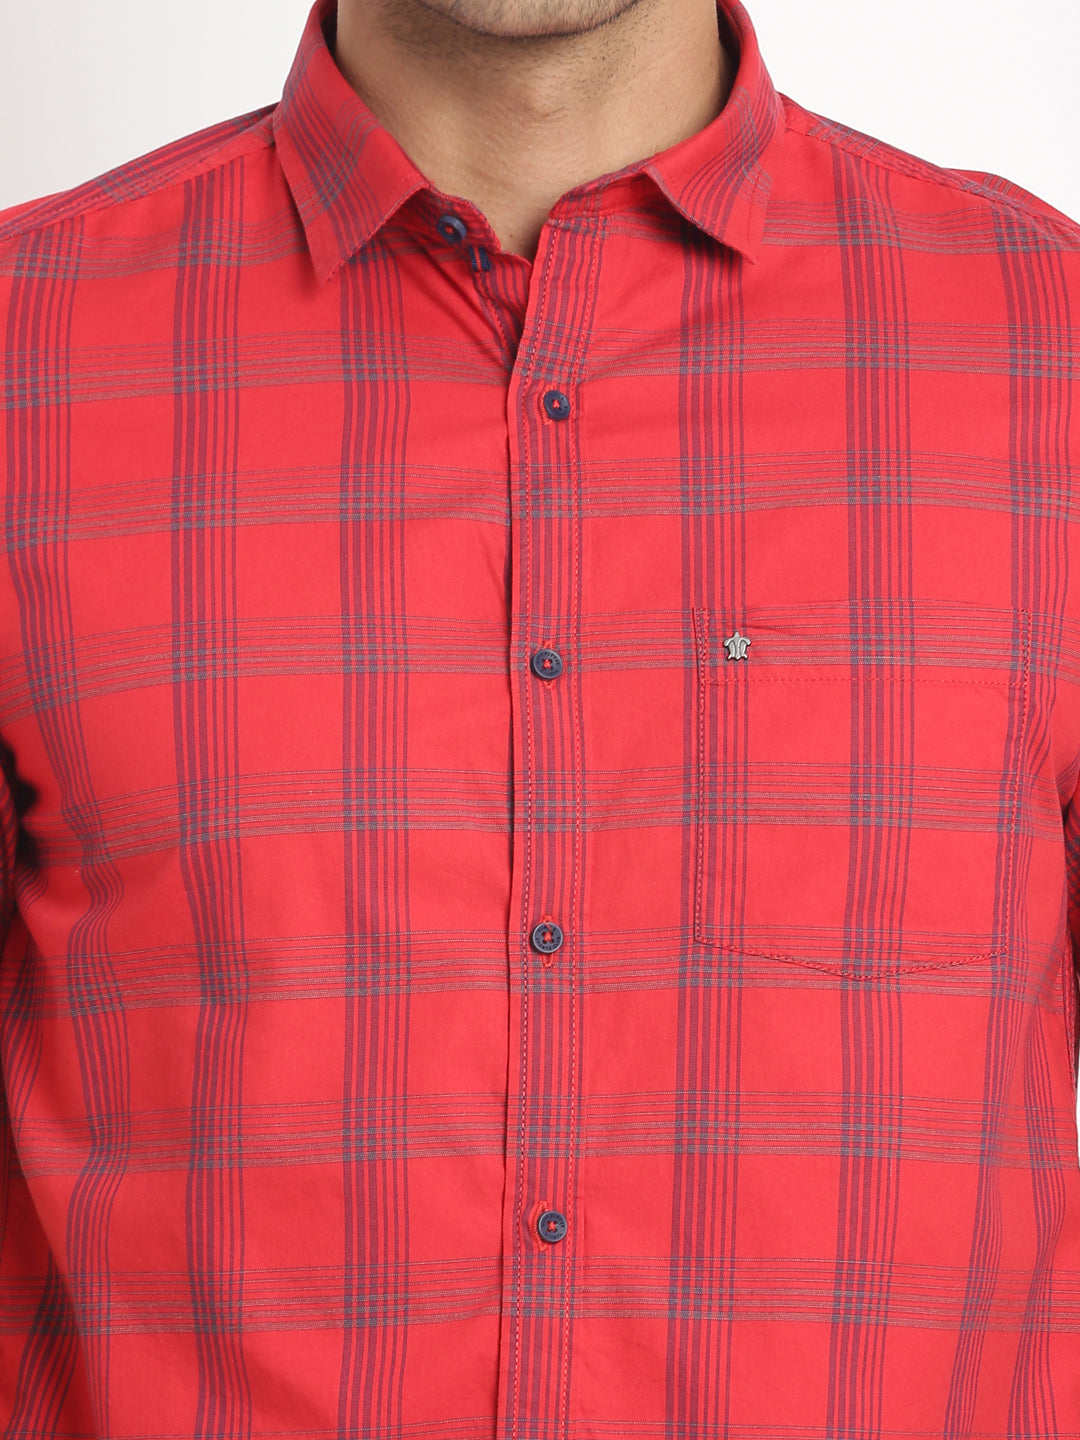 100% Cotton Red Checkered Slim Fit Half Sleeve Casual Shirt